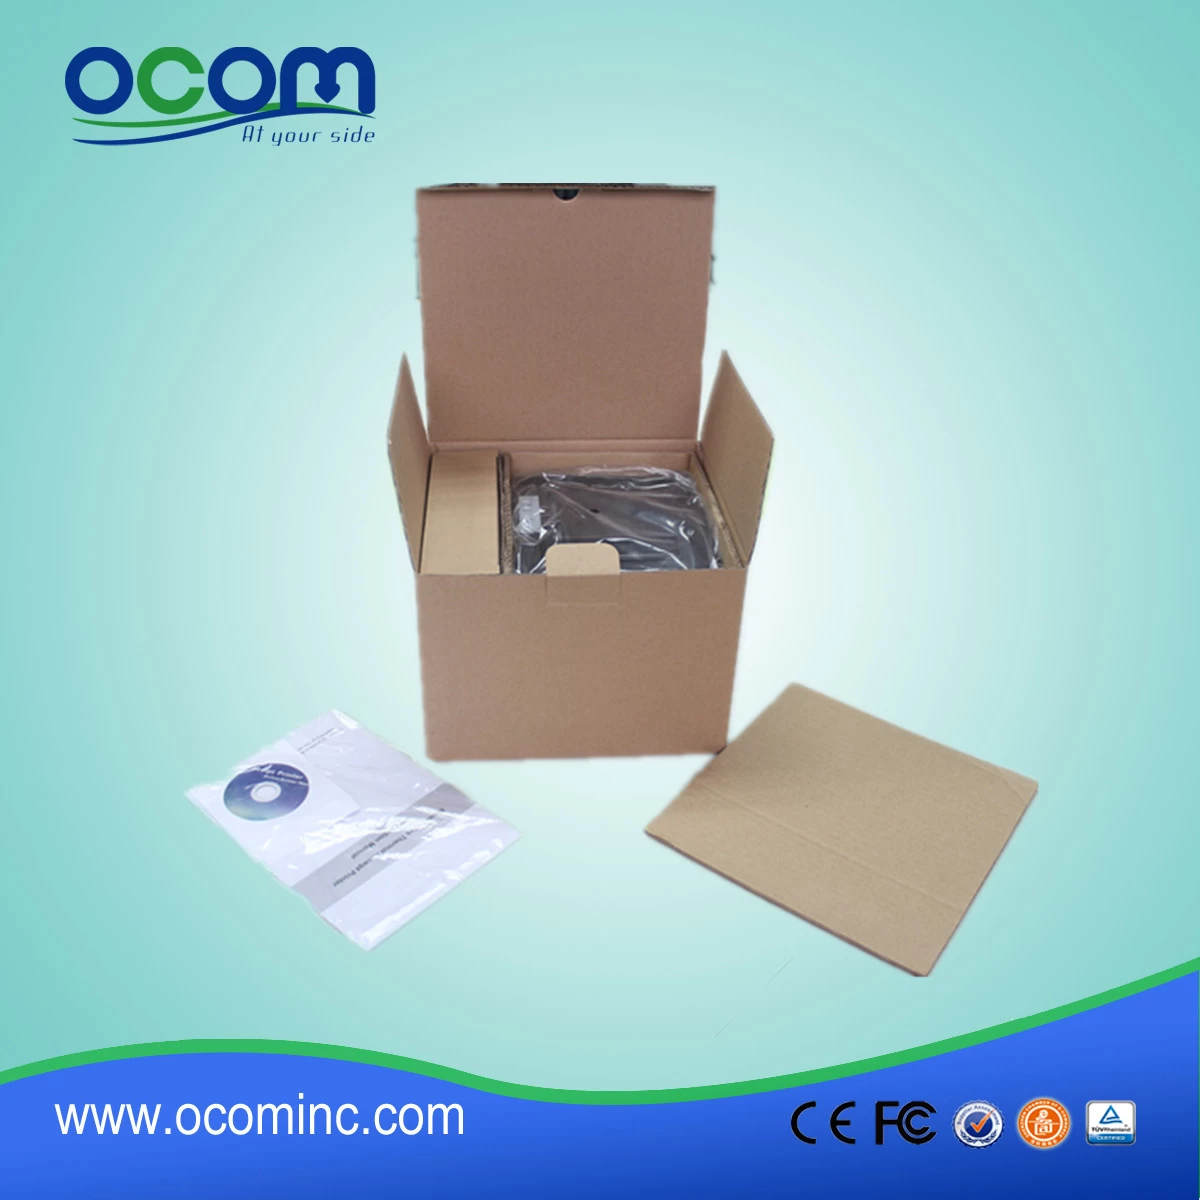 OCPP-88A-W new wifi pos thermal printer for kitchen